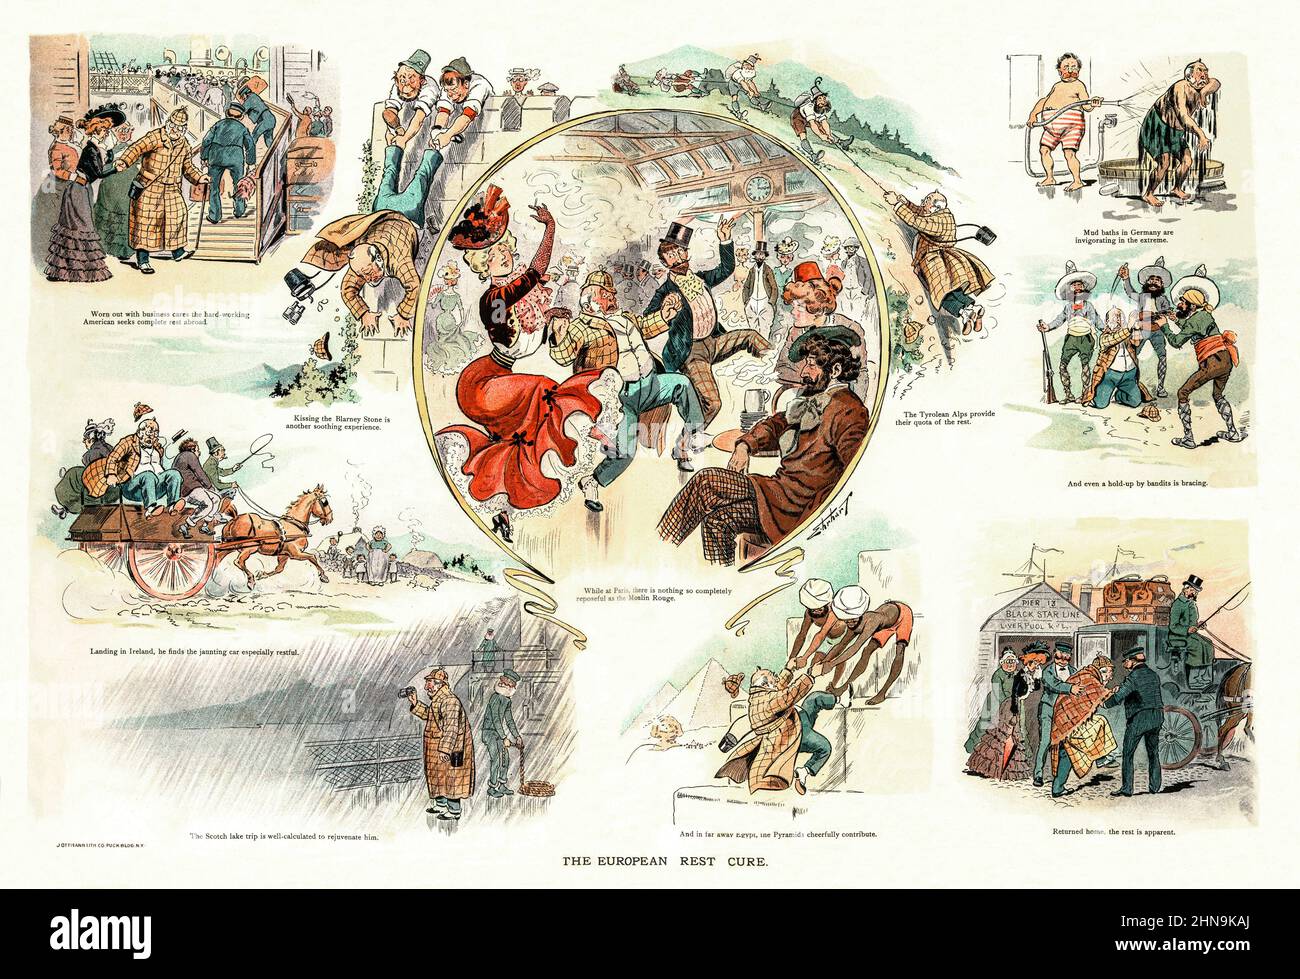 A late 19th century American Puck Magazine series of vignettes of an elderly couple embarking on a leisurely grand tour of Europe, stopping in Ireland, Scotland, France, Germany, and Egypt, before returning home exhausted and in poor health from the activity and stress of travel. Stock Photo